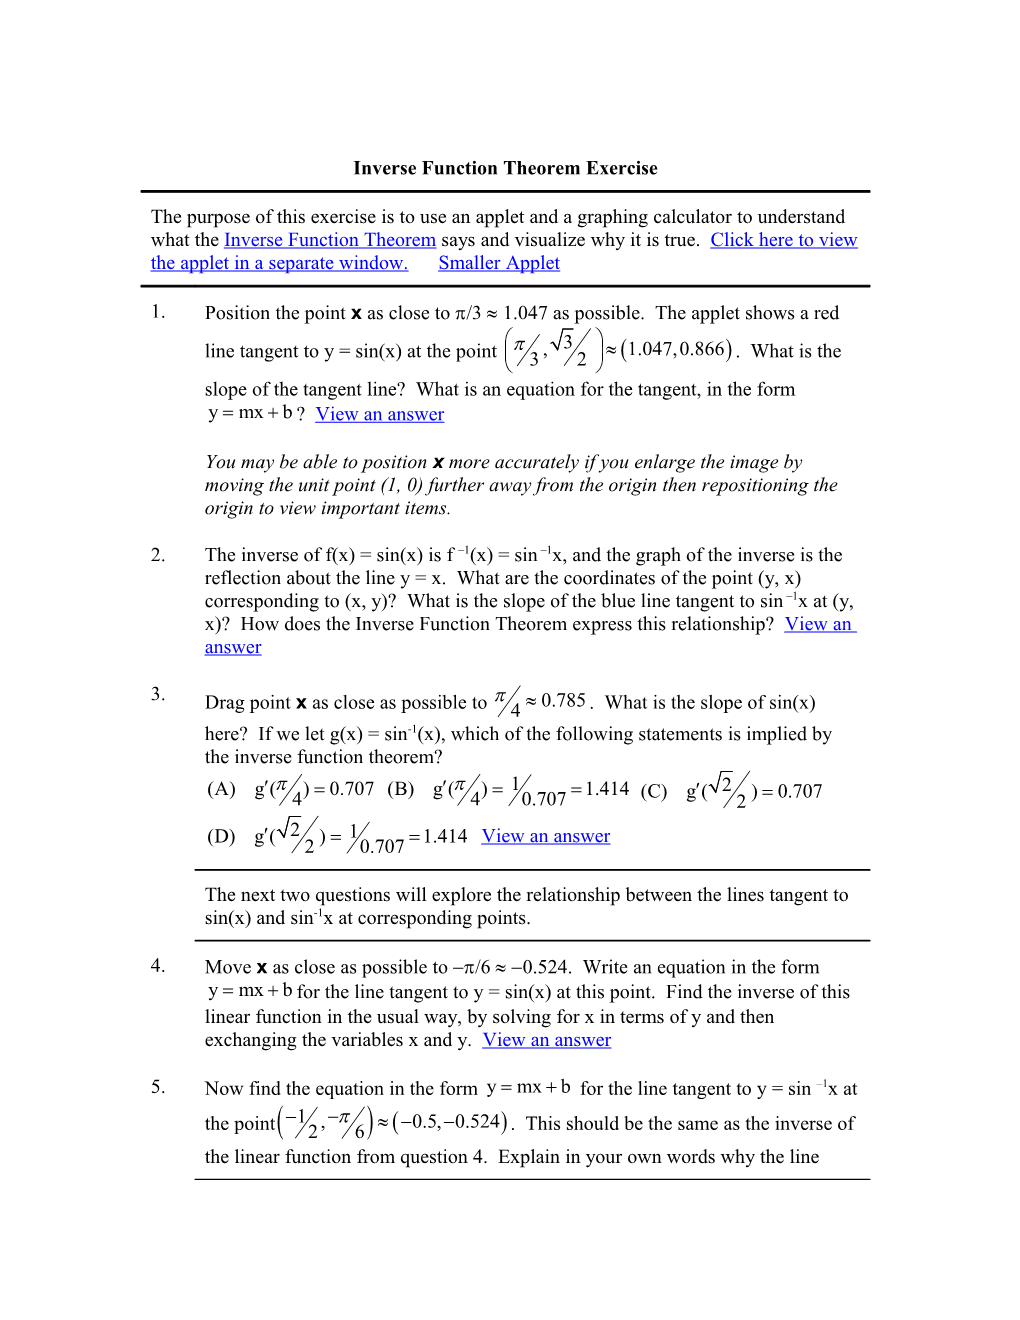 Inverse Function Theorem Exercise